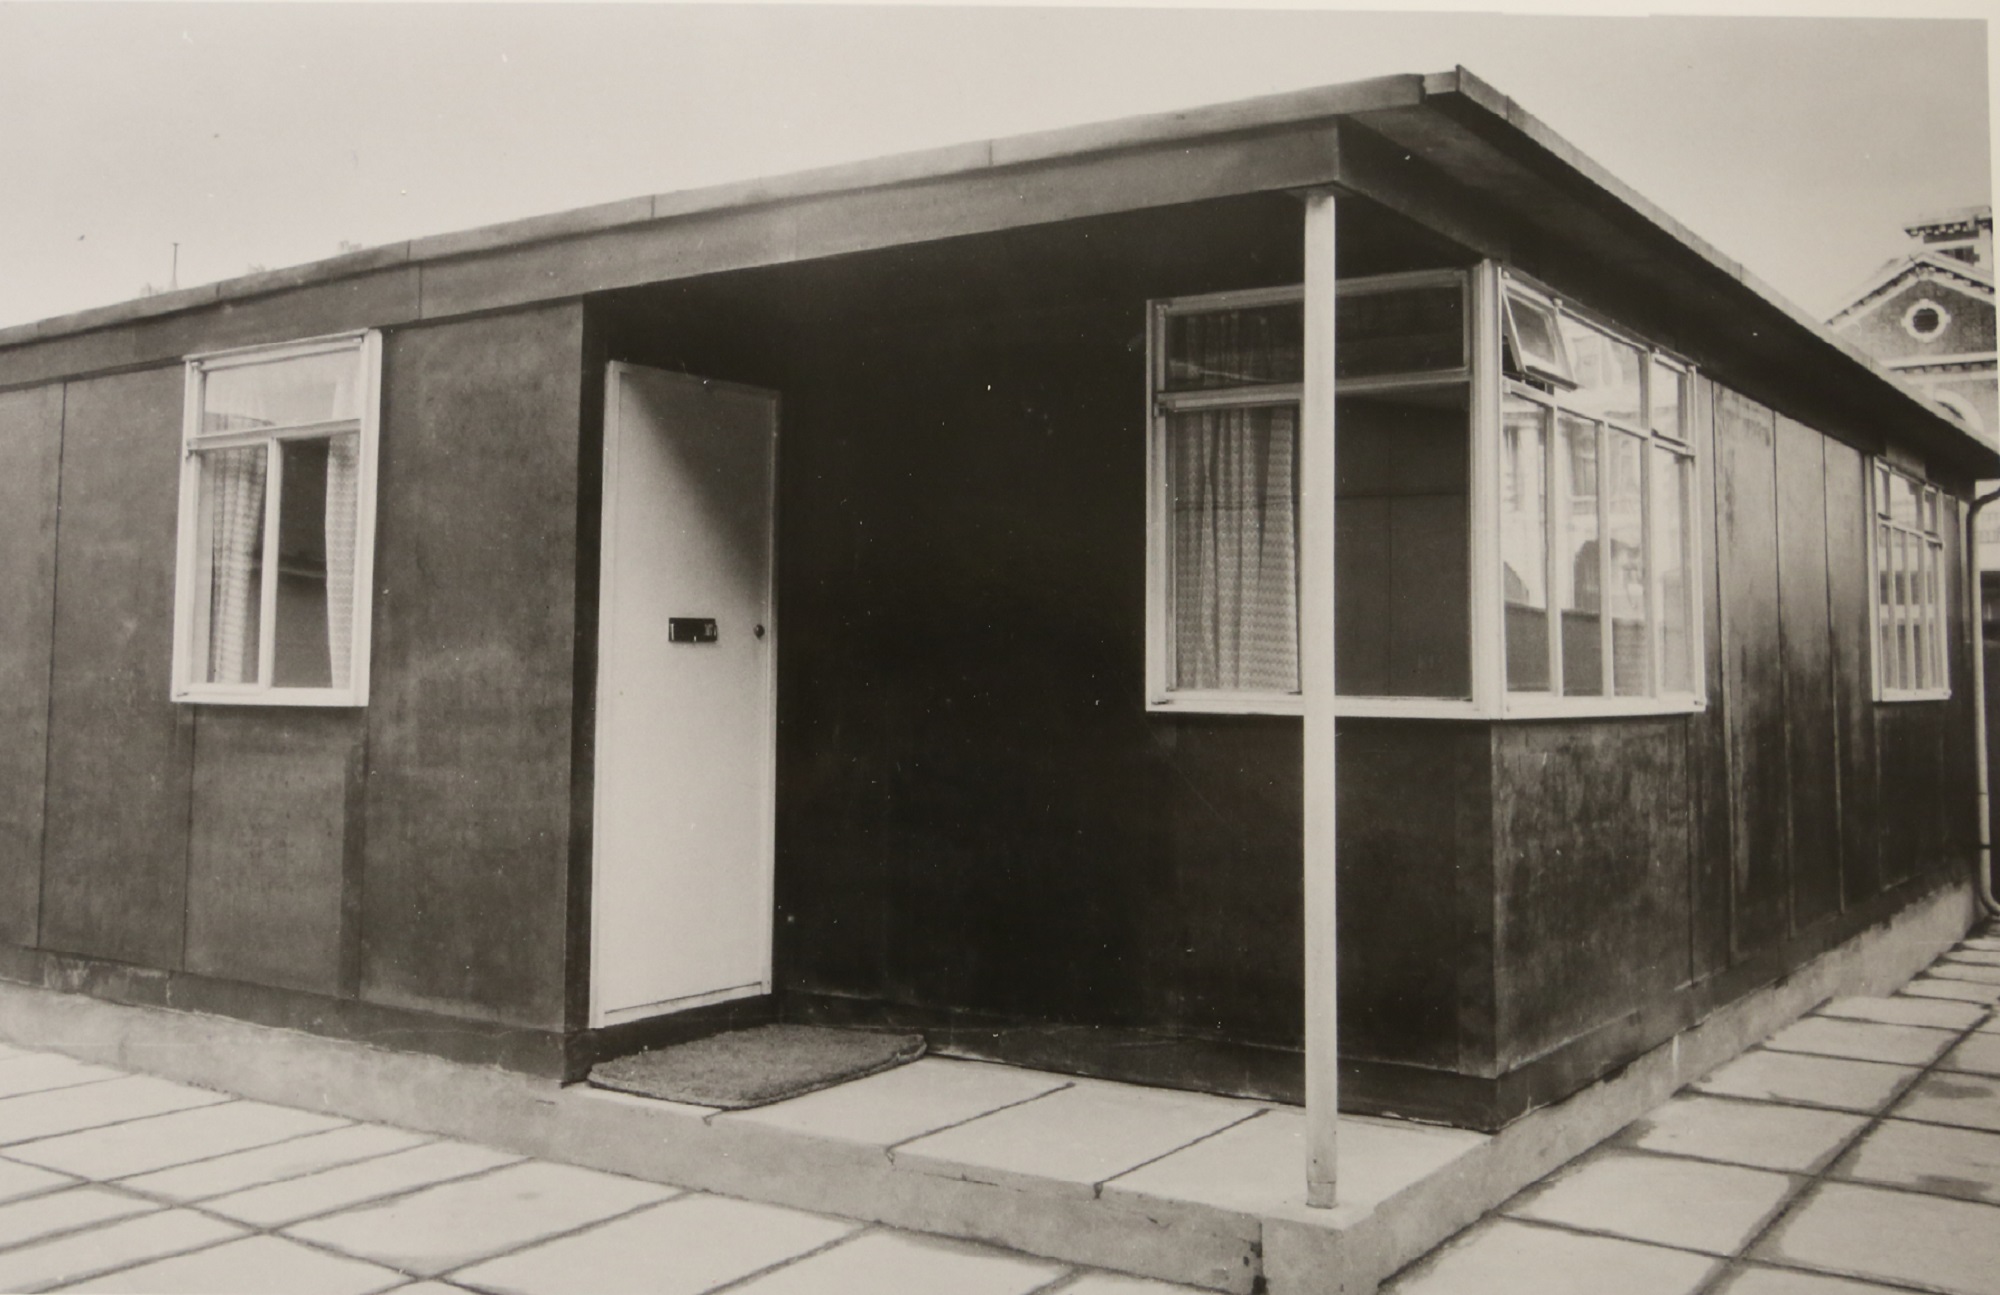 Uni-Seco Mk3 side entrance prefab on display at the Tate Gallery 1944